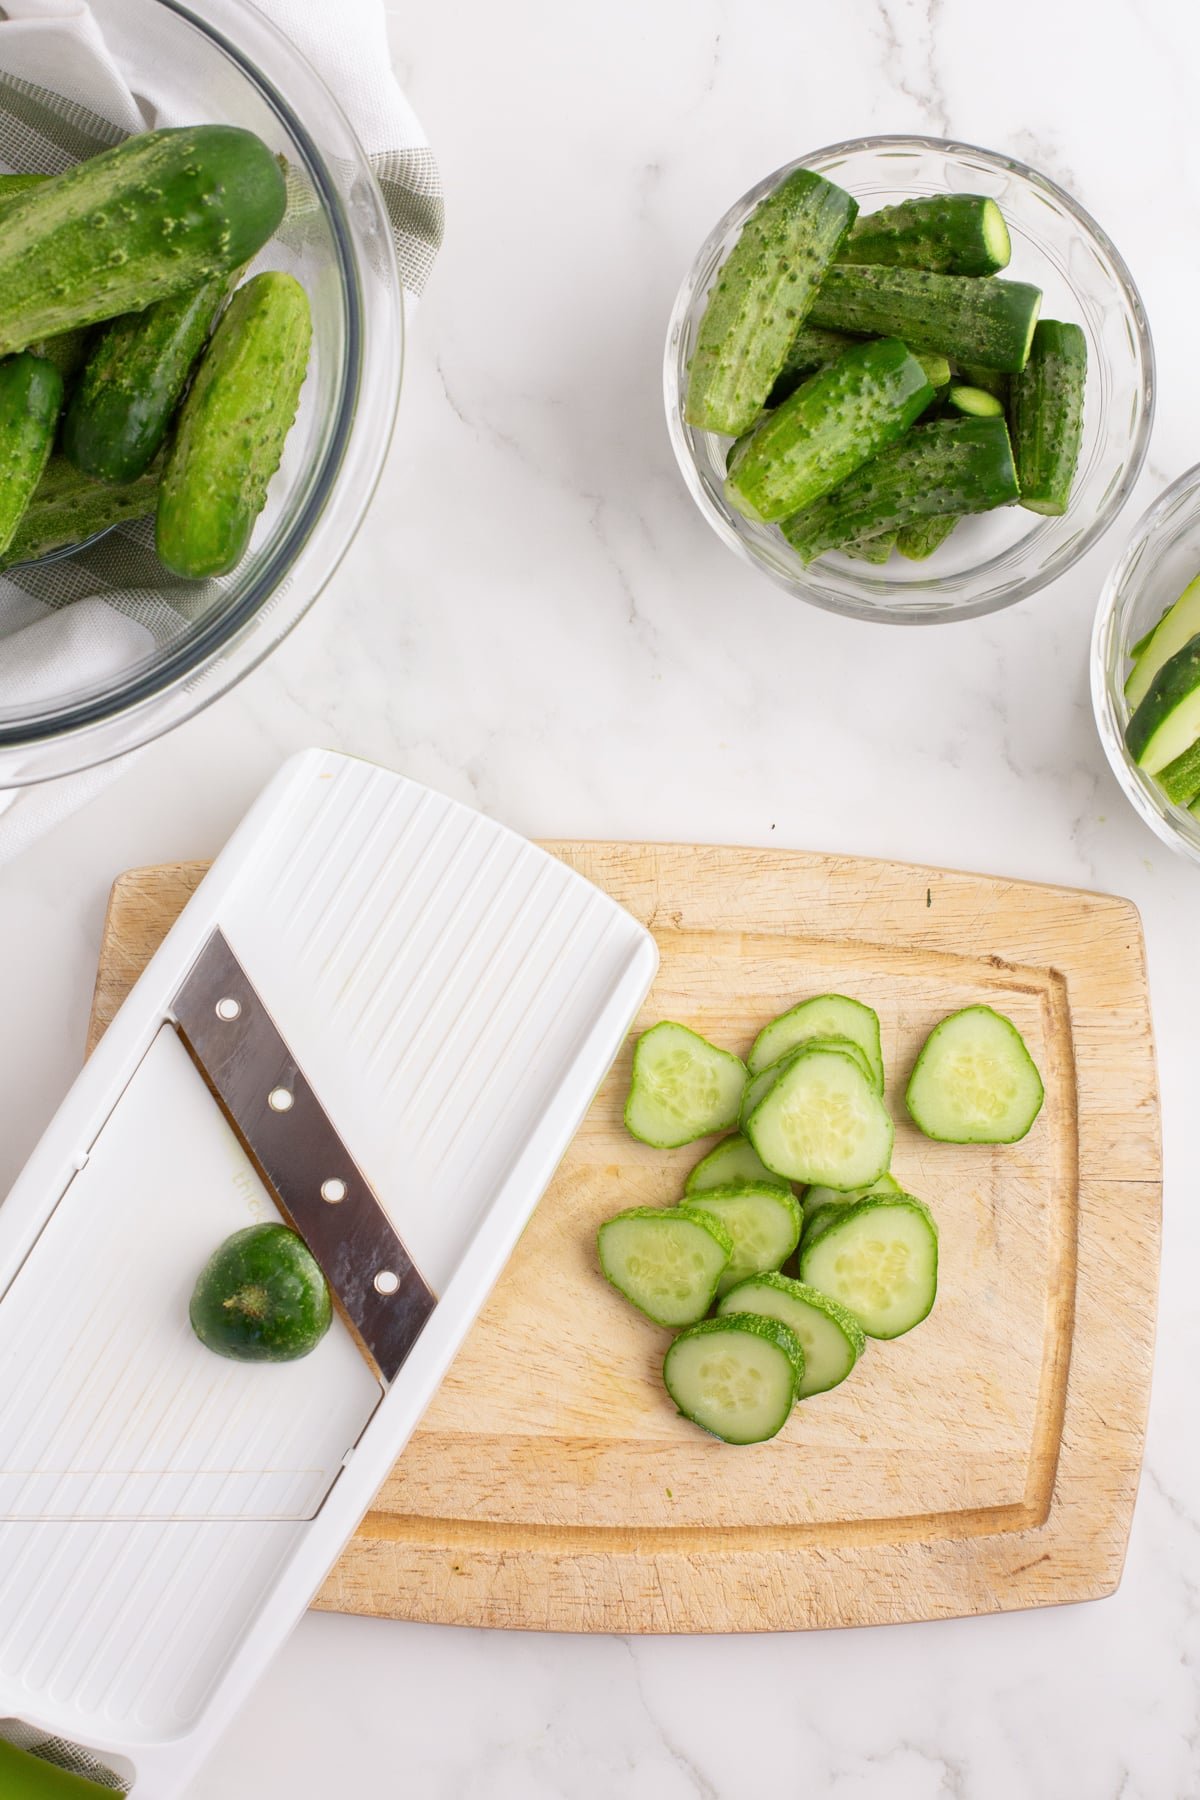 Using a mandolin to slice cucumbers into chips.